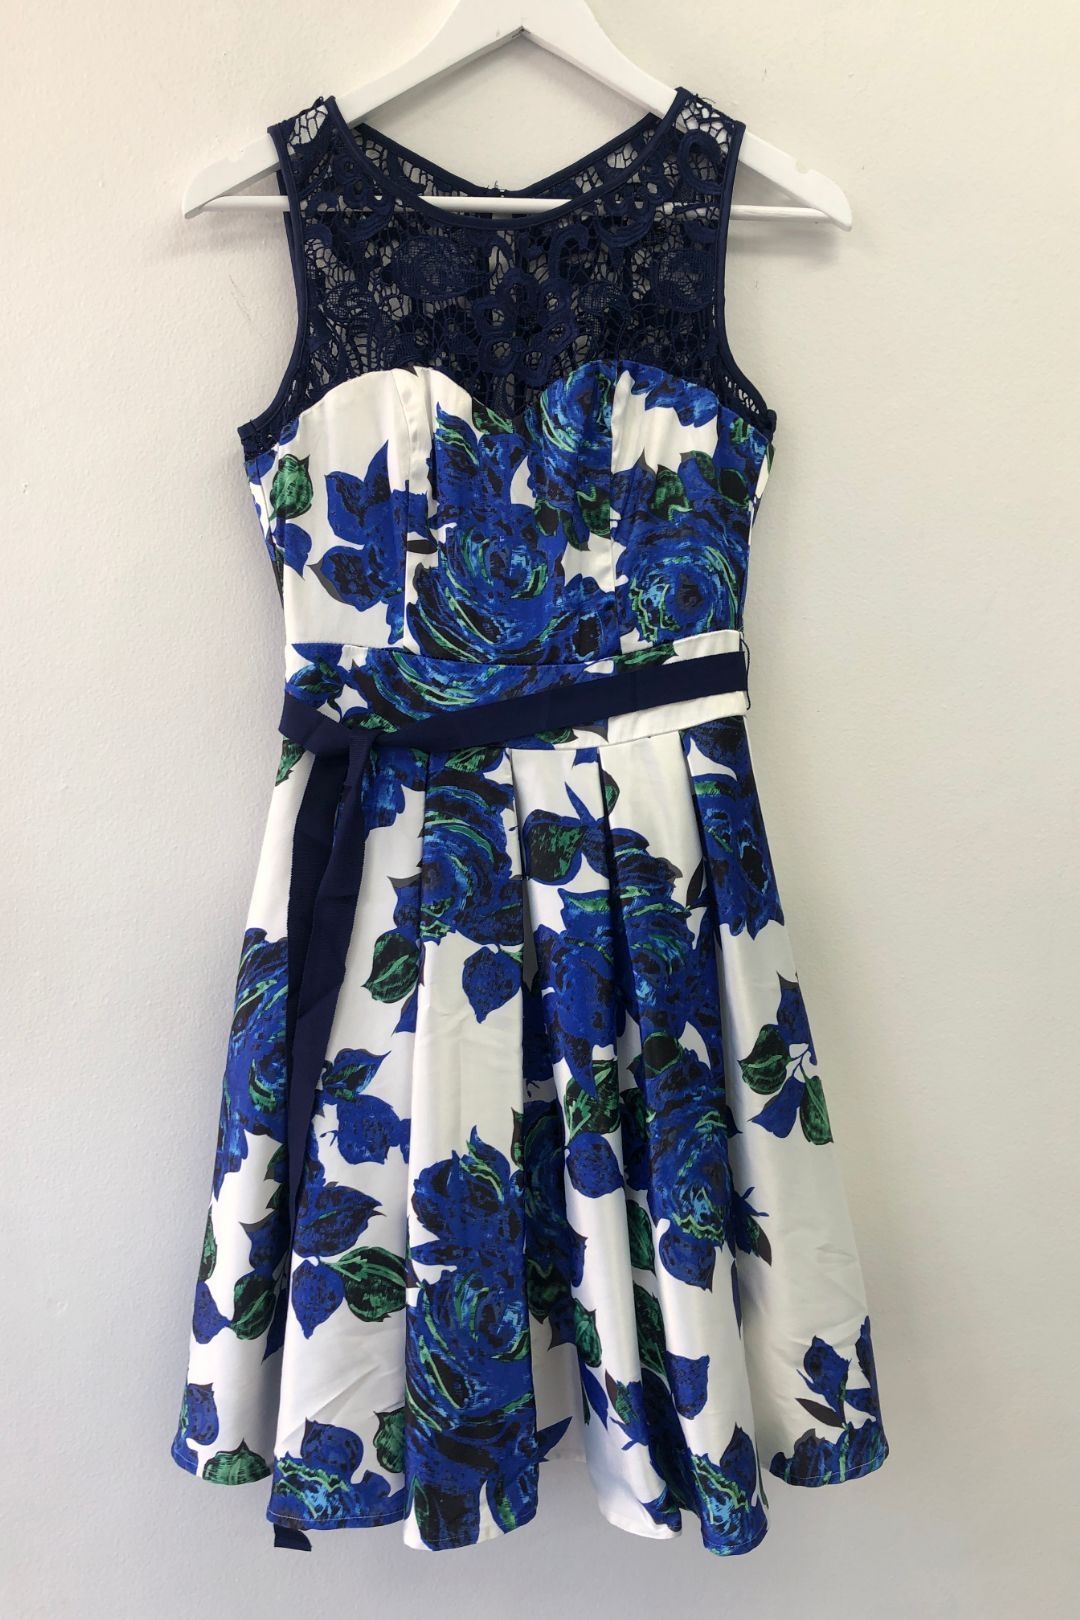 Review - Fit and Flare Grosvenor Dress